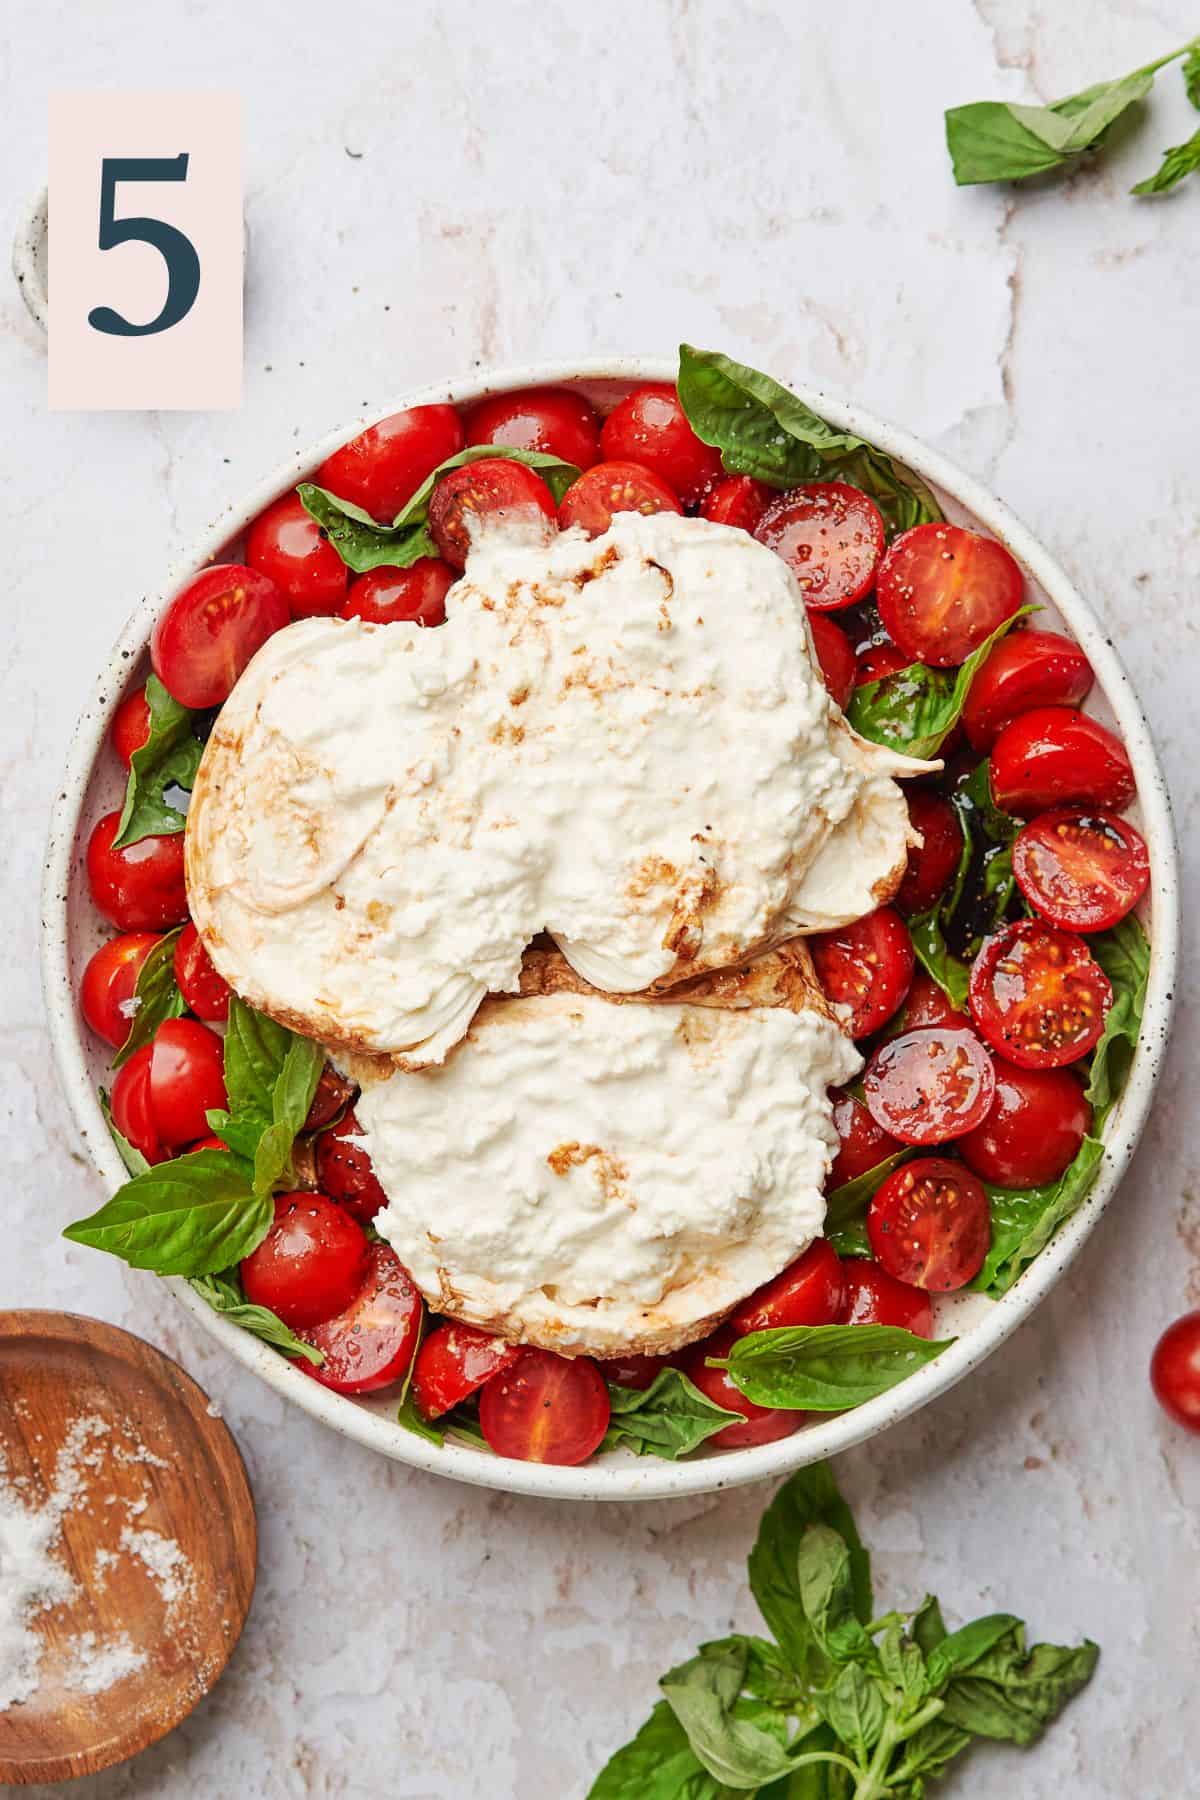 Burrata cheese broken open with a spoon or knife to evenly distribute over salad.